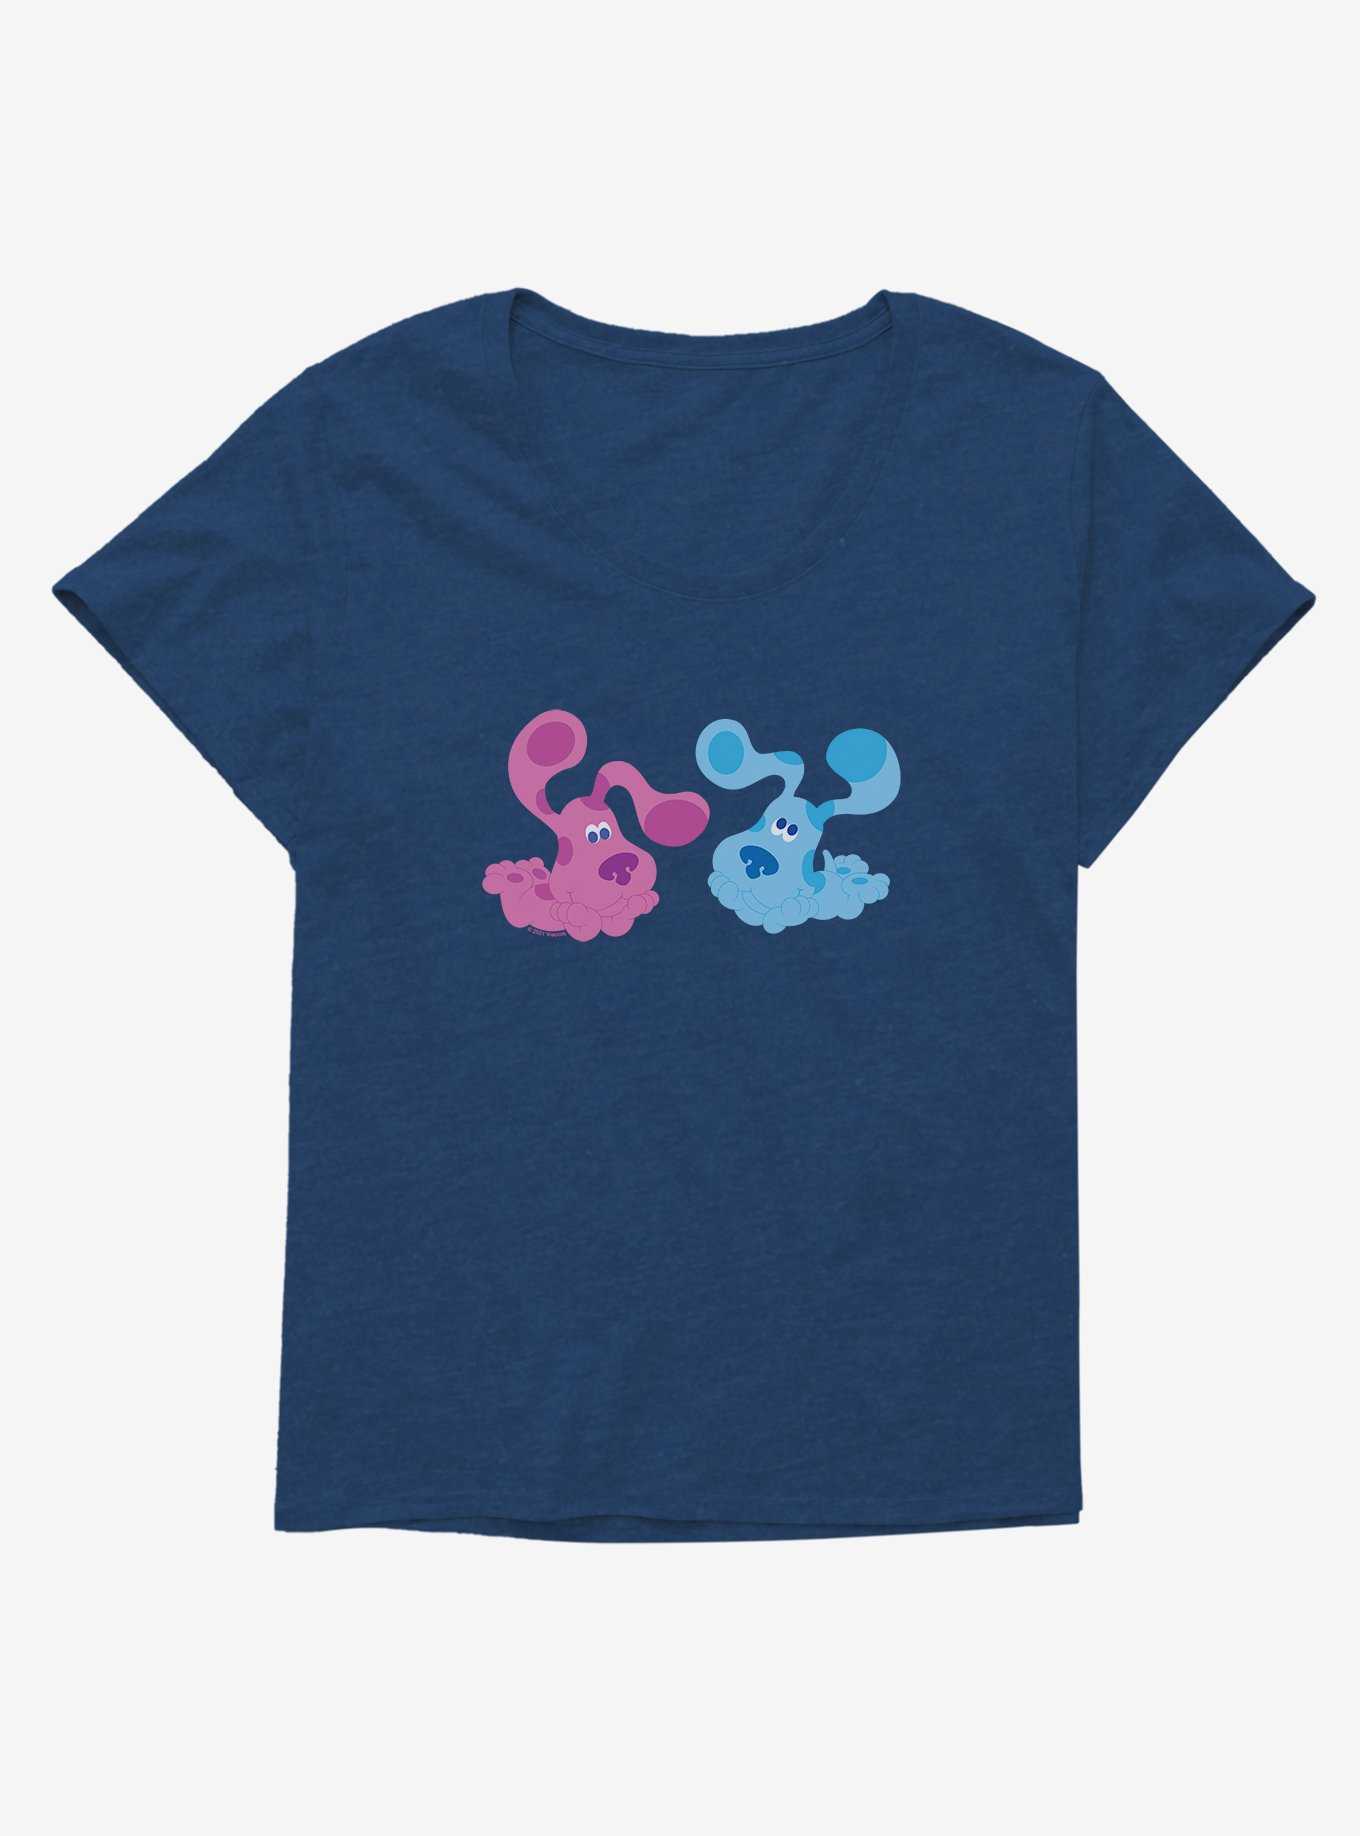 Blue's Clues Playful Magenta And Blue Girls T-Shirt Plus Size, , hi-res